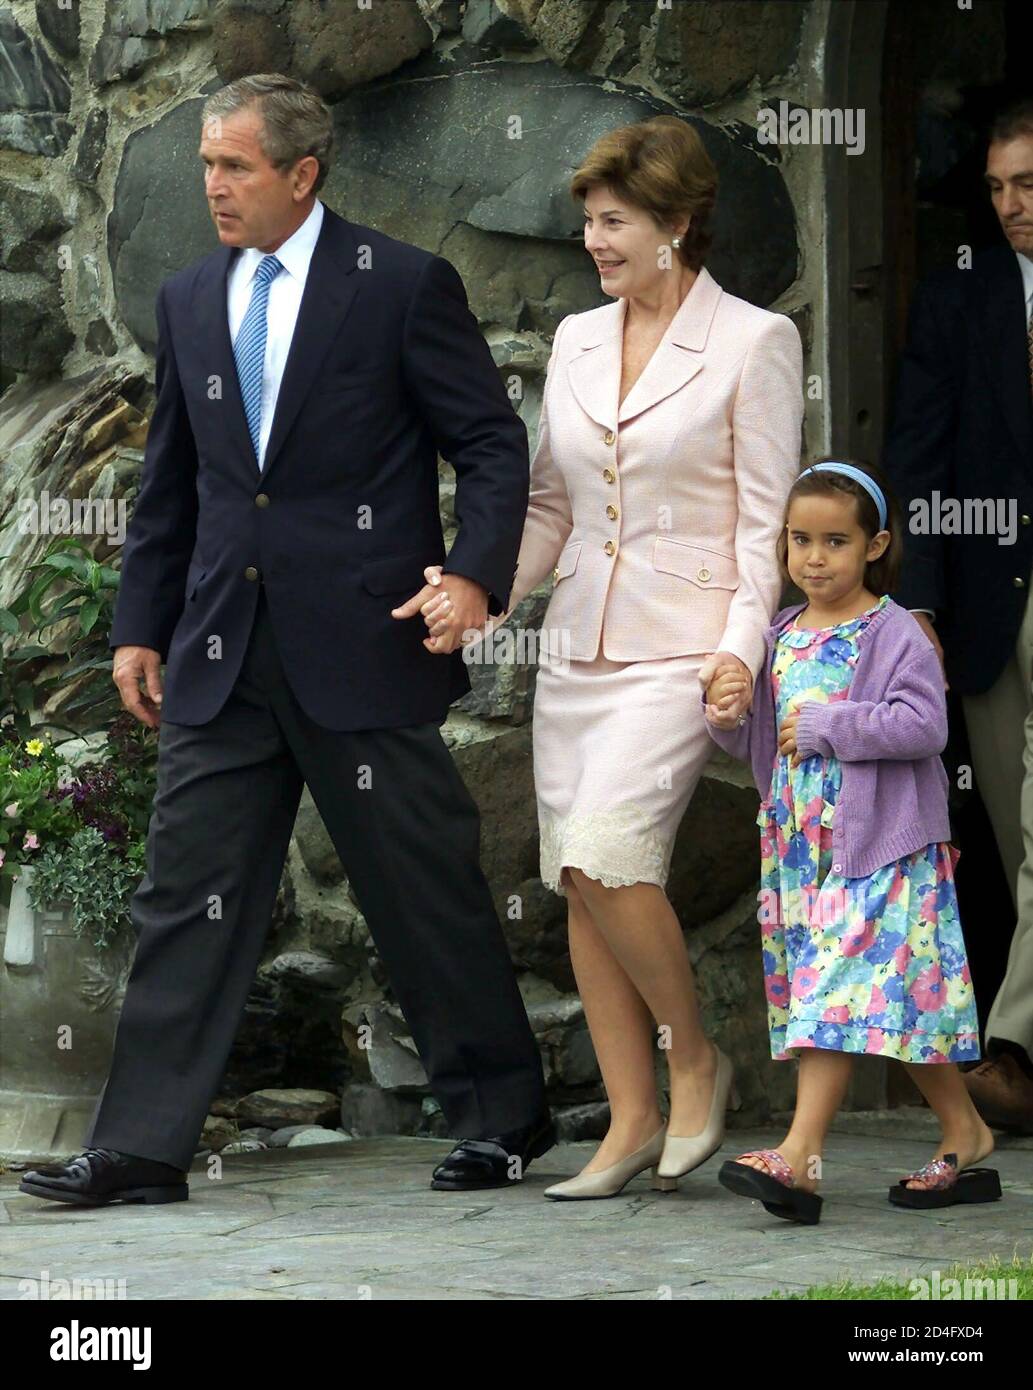 U.S. President George W. Bush and first lady Laura Bush leave church with their young niece Gigi Koch, daughter of the president's sister Dorothy, after attending Sunday services at St. Ann's Episcopal Church July 8, 2001 in Kennebunkport, Maine. The president is in the final day of a four-day family vacation at his parents' seaside summer home.  JRB/ME Stock Photo